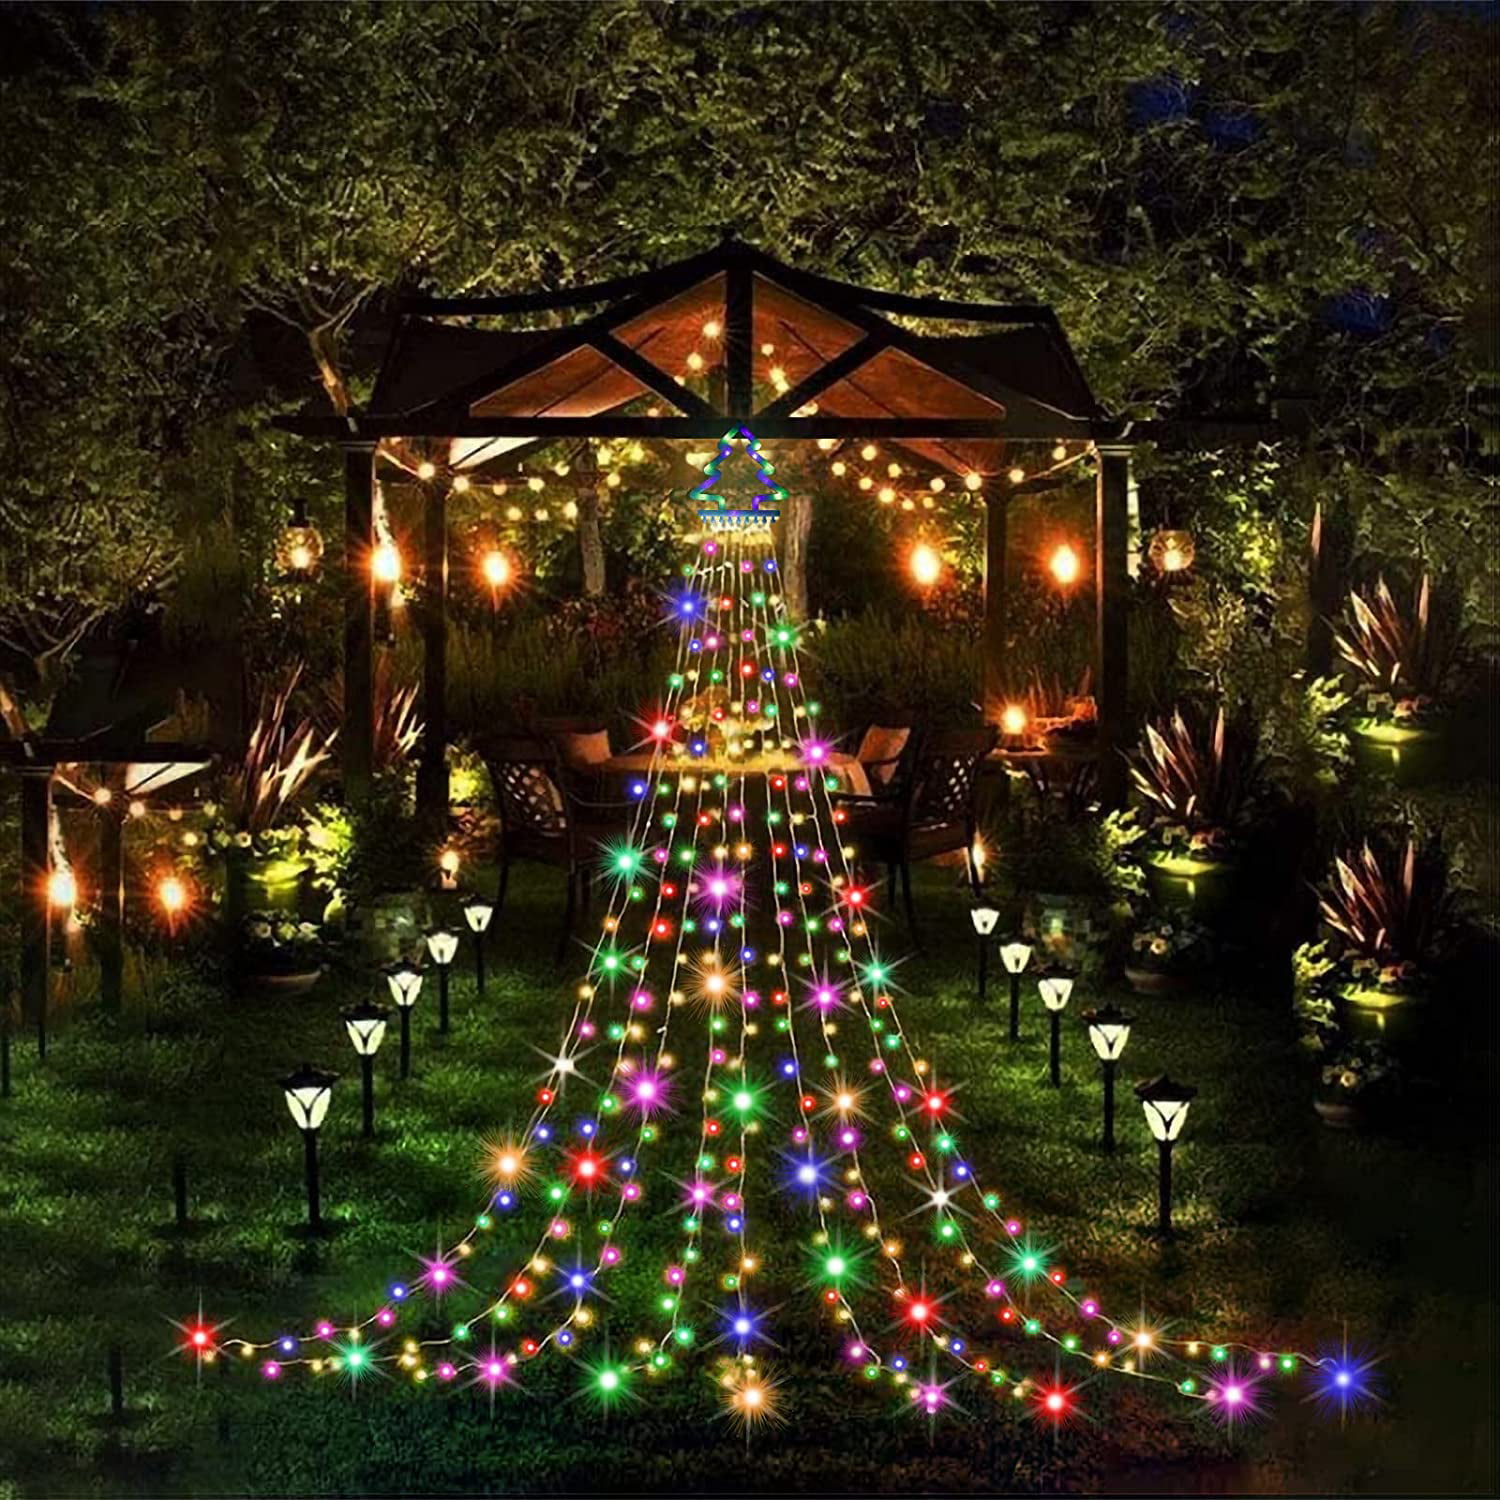 Details about   50/200LED Solar String Lights Waterproof Copper Wire Fairy Outdoor Garden Xmas 